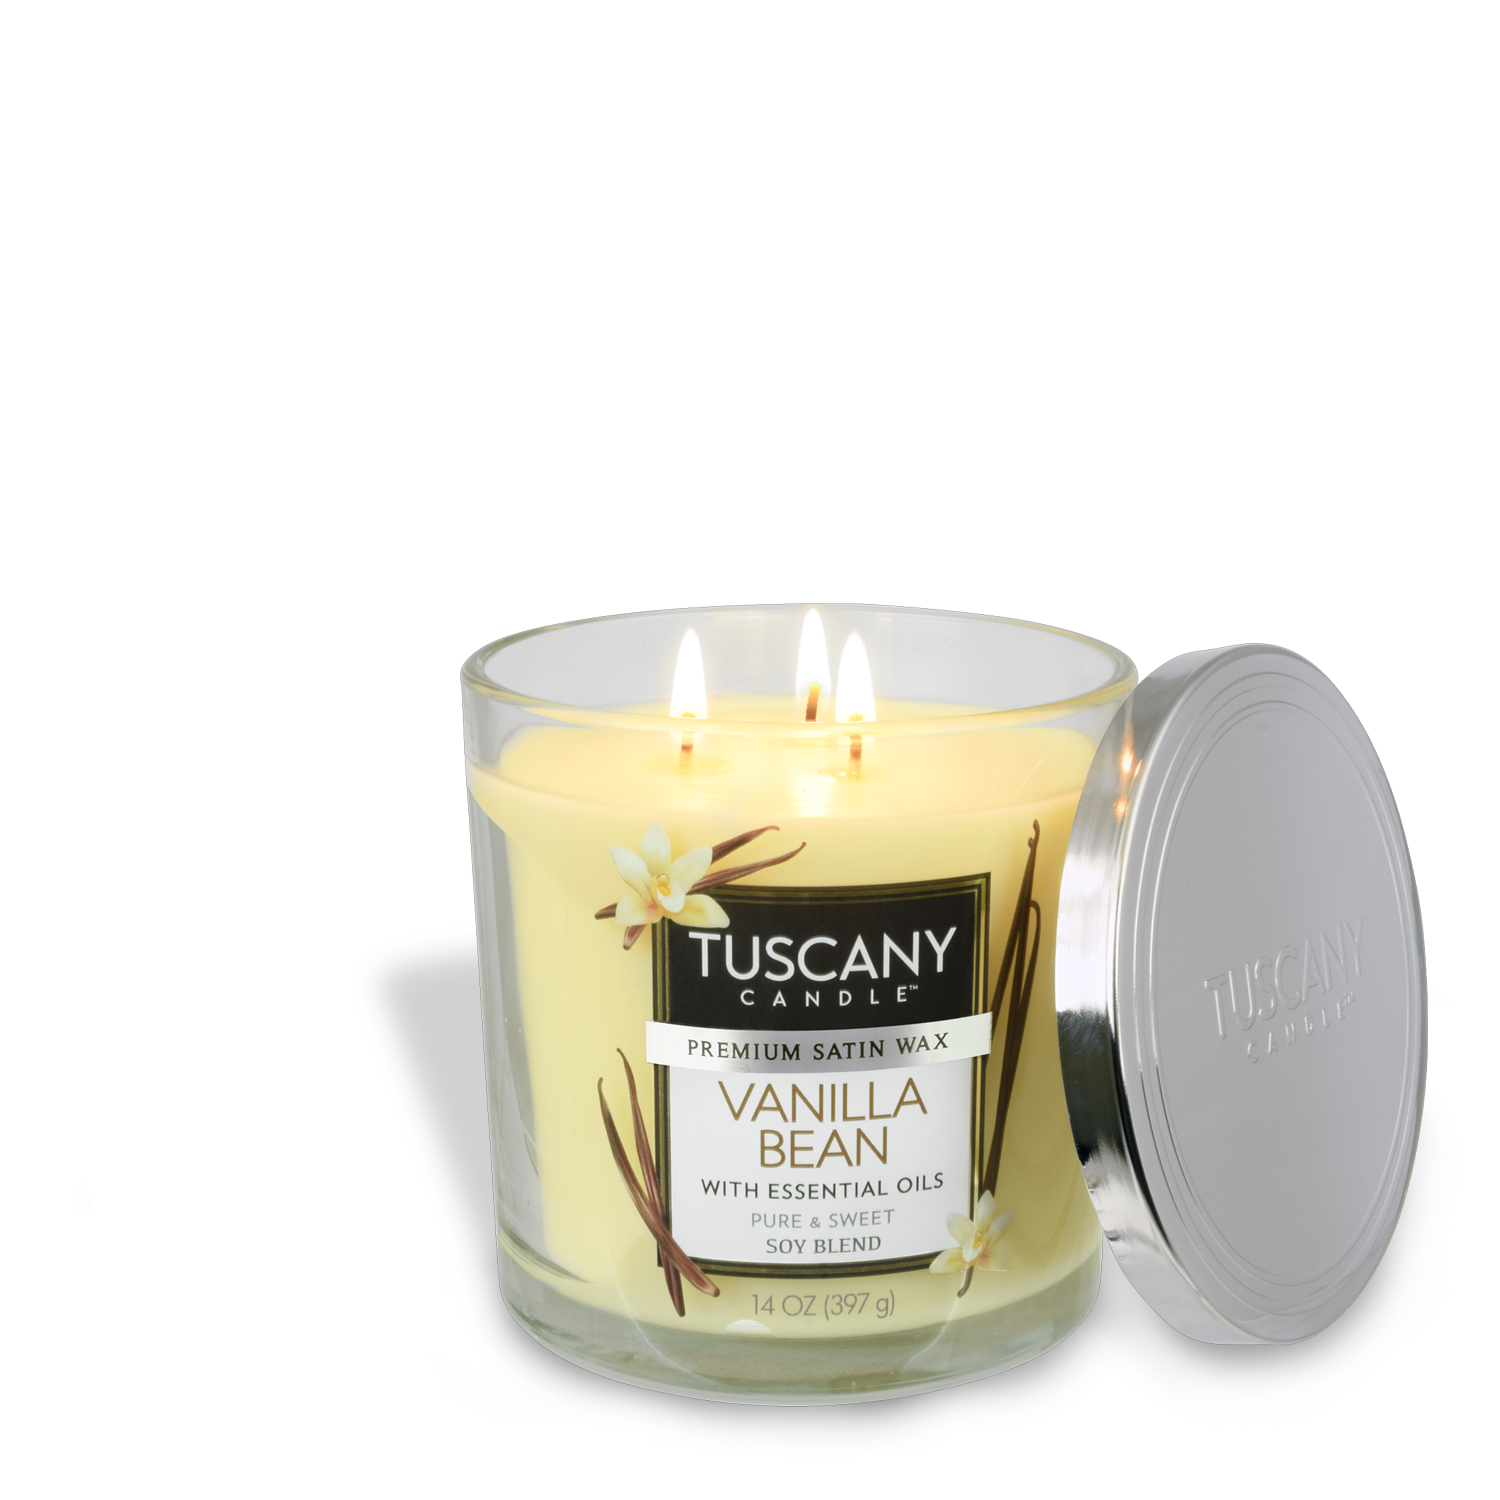 Indulge in the rich fragrance of the Vanilla Bean Long-Lasting Scented Jar Candle (14 oz) by Tuscany Candle, infused with essential oils for a delightful aroma.